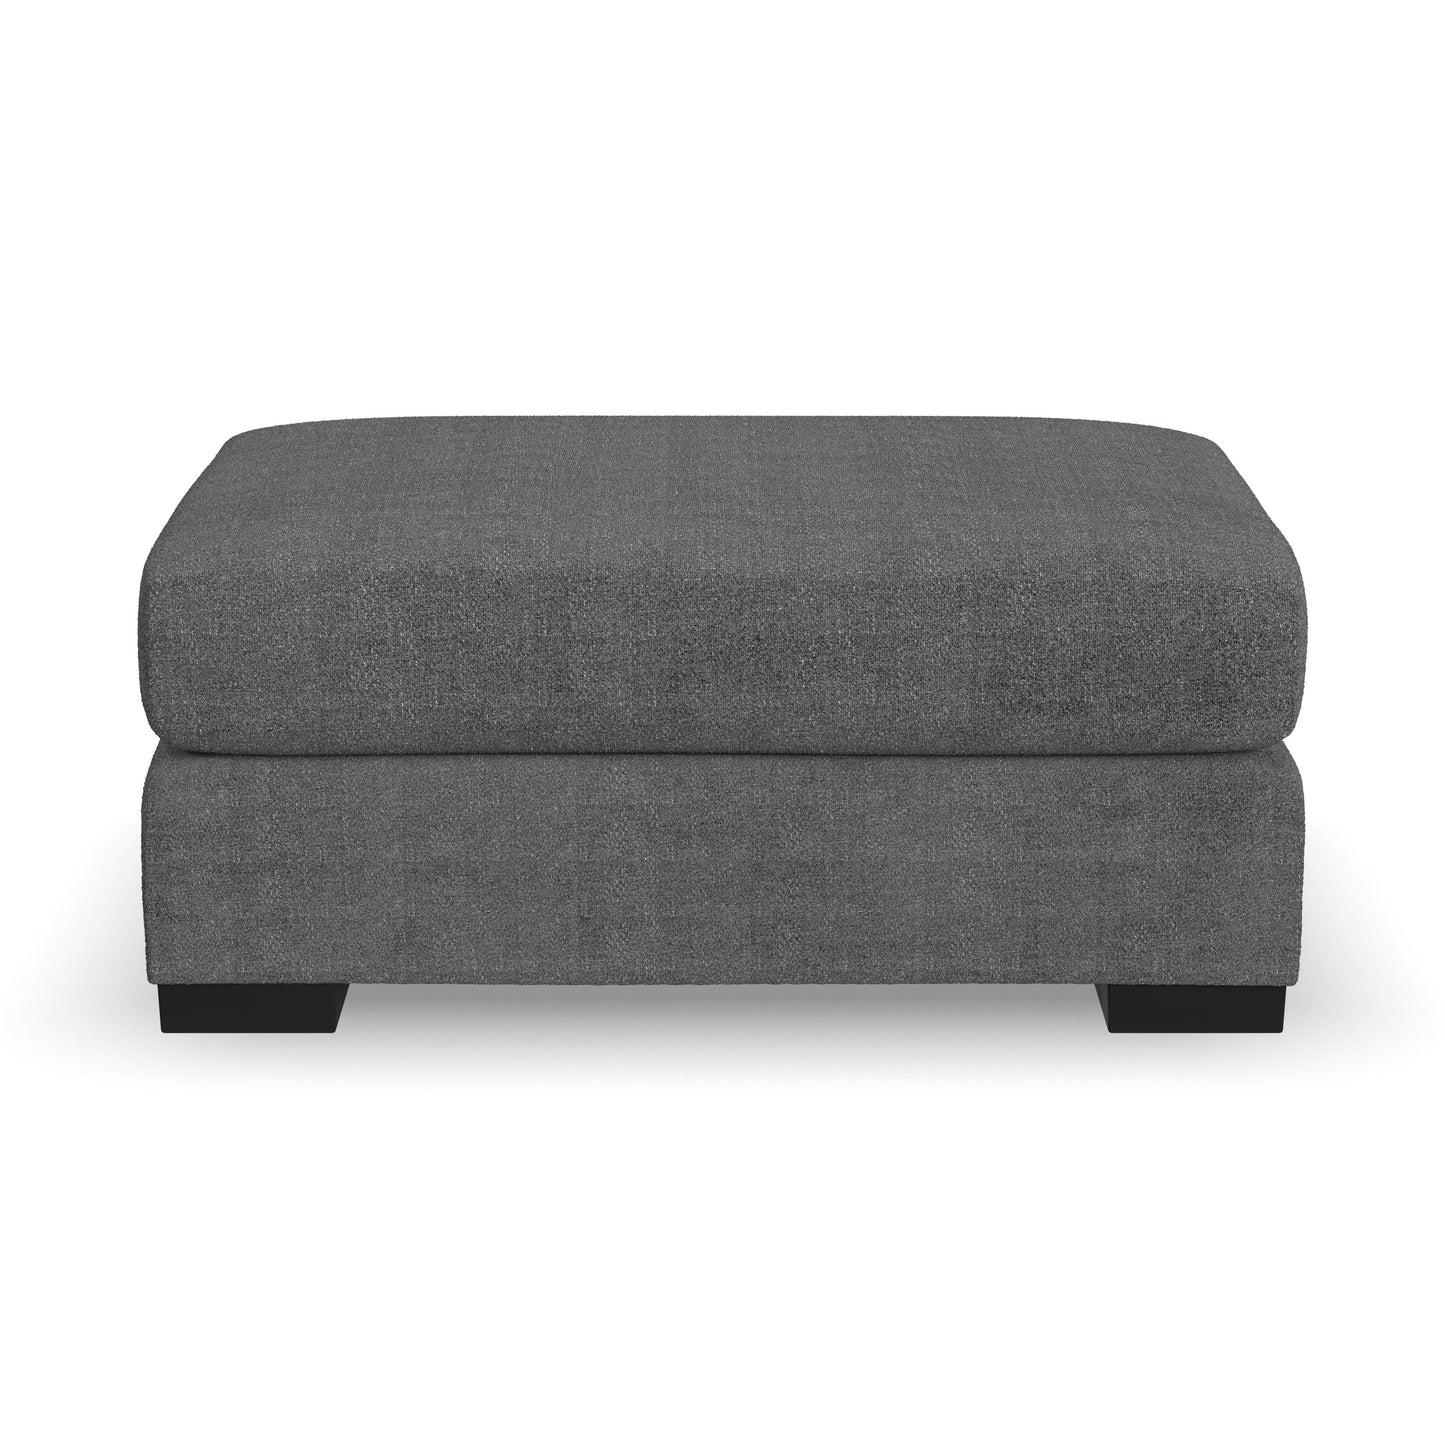 Ottoman in Chambray